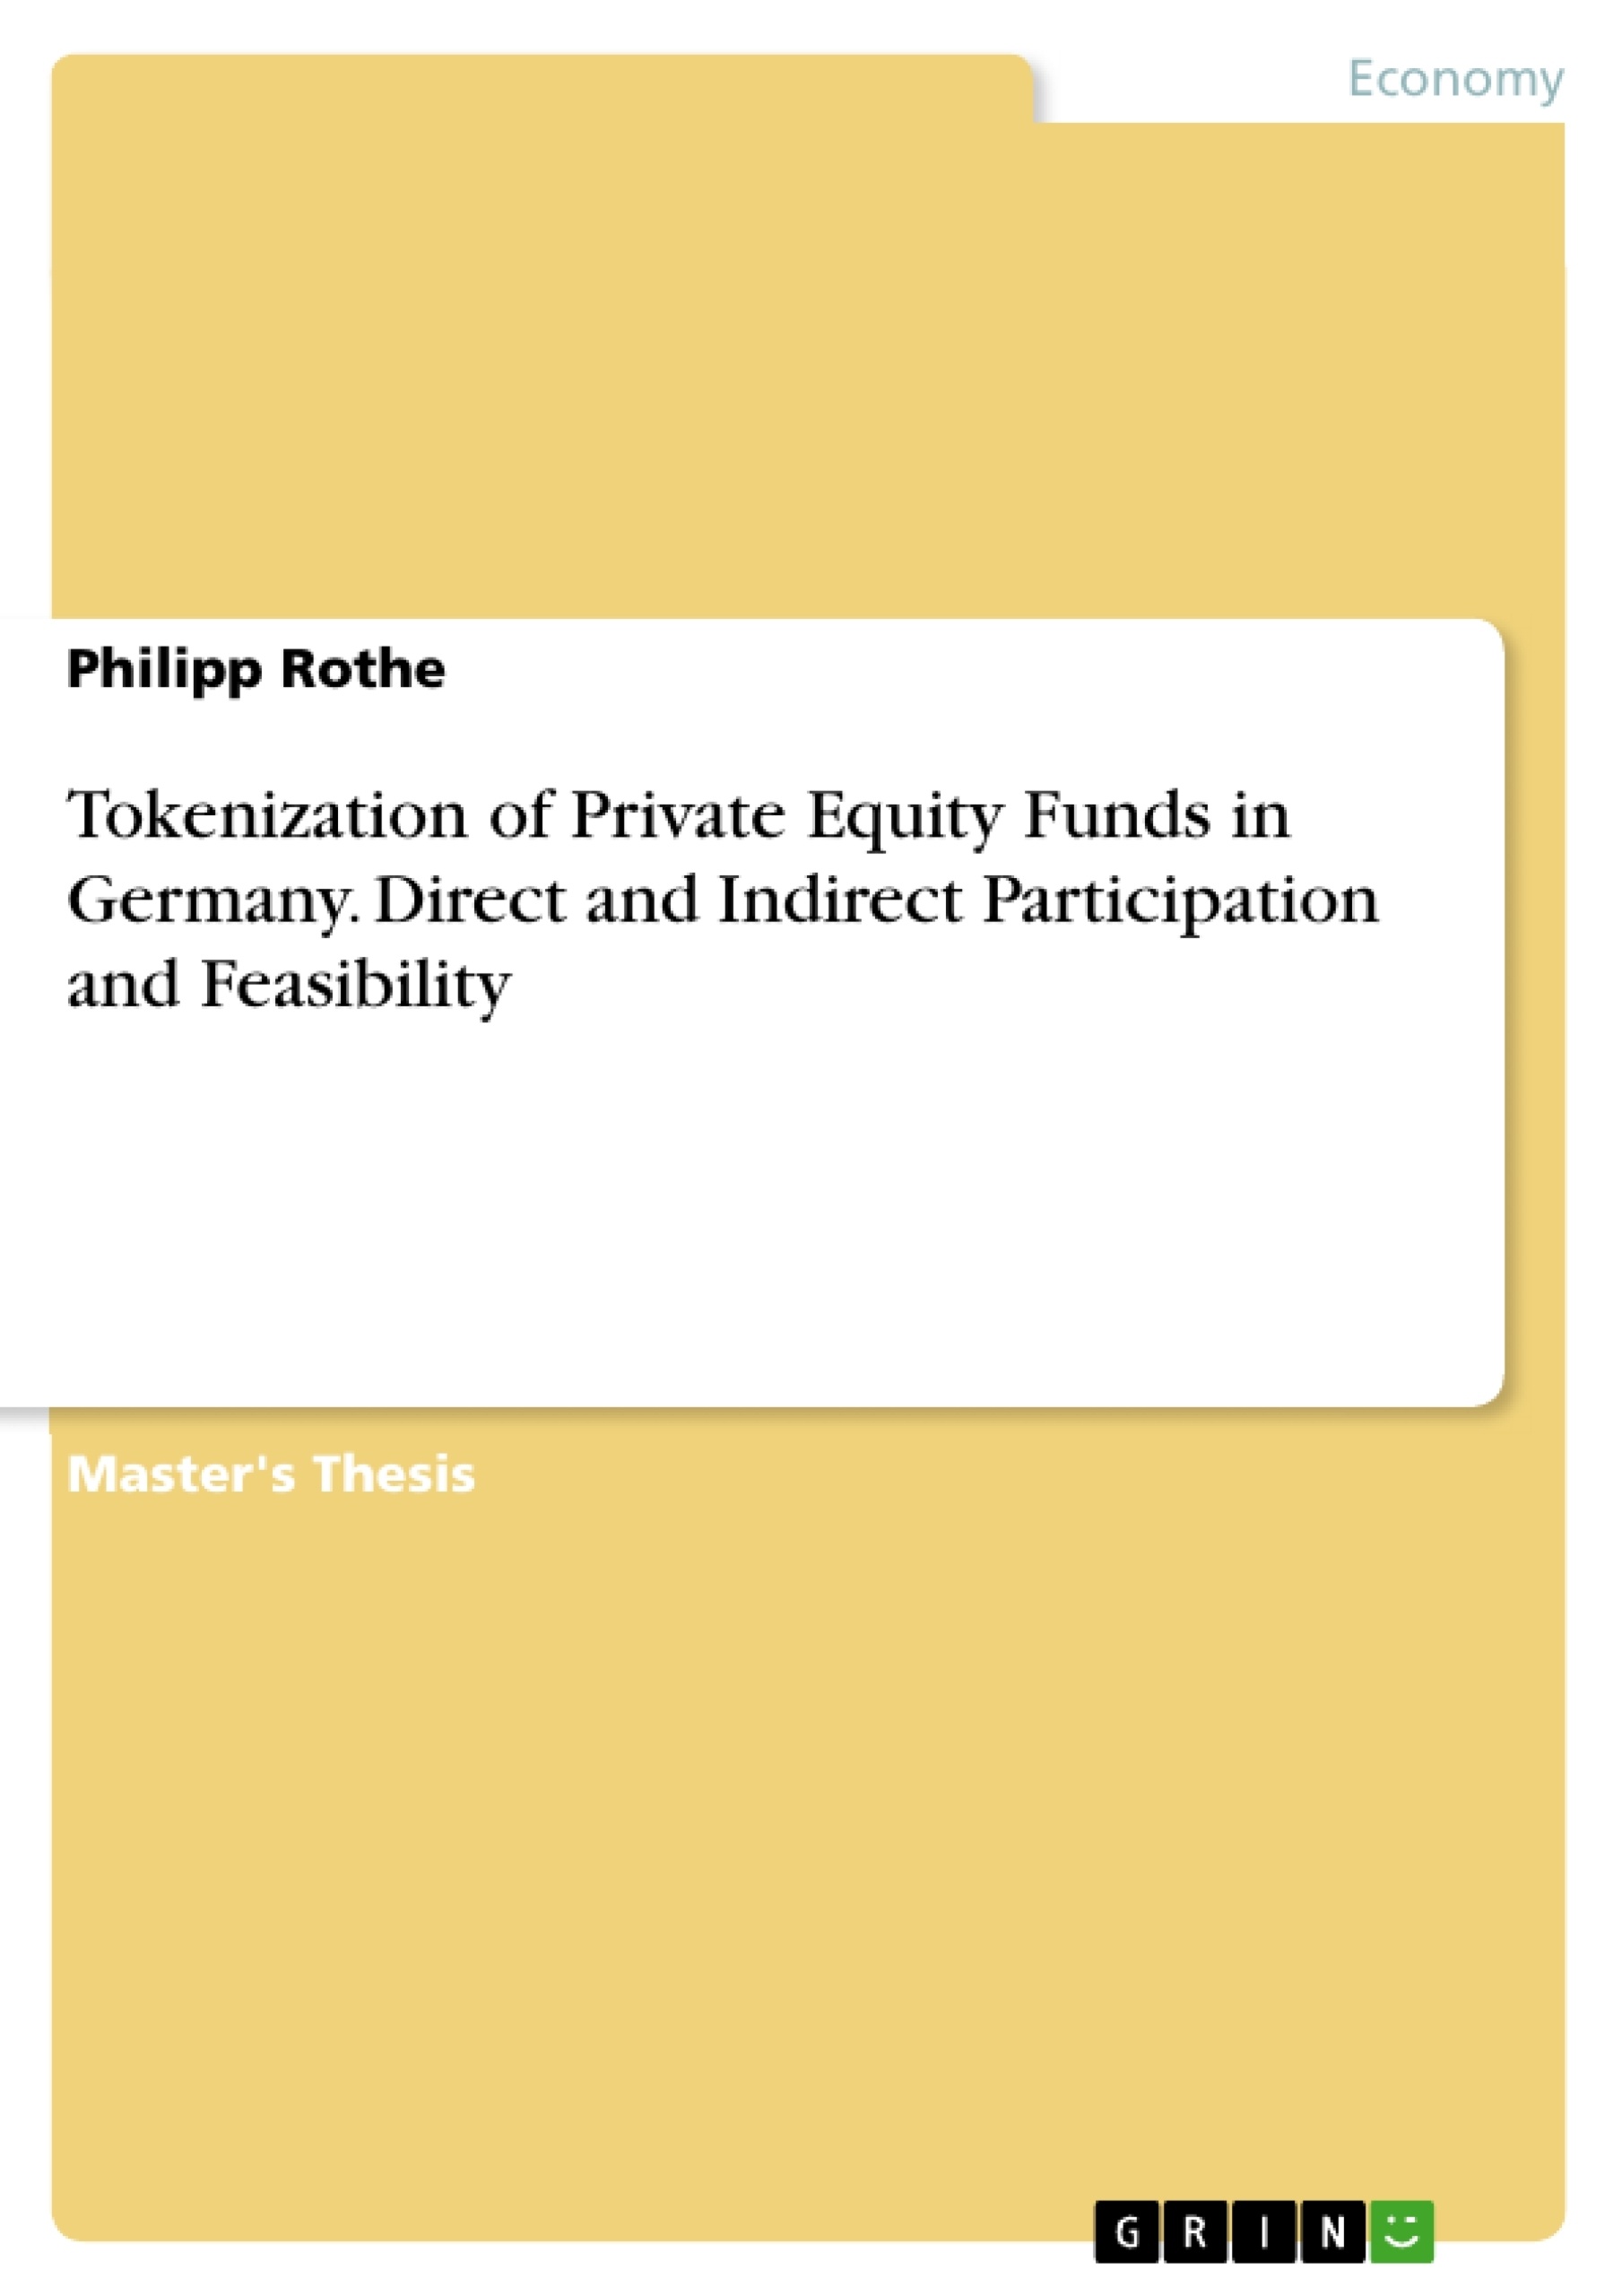 Title: Tokenization of Private Equity Funds in Germany. Direct and Indirect Participation and Feasibility